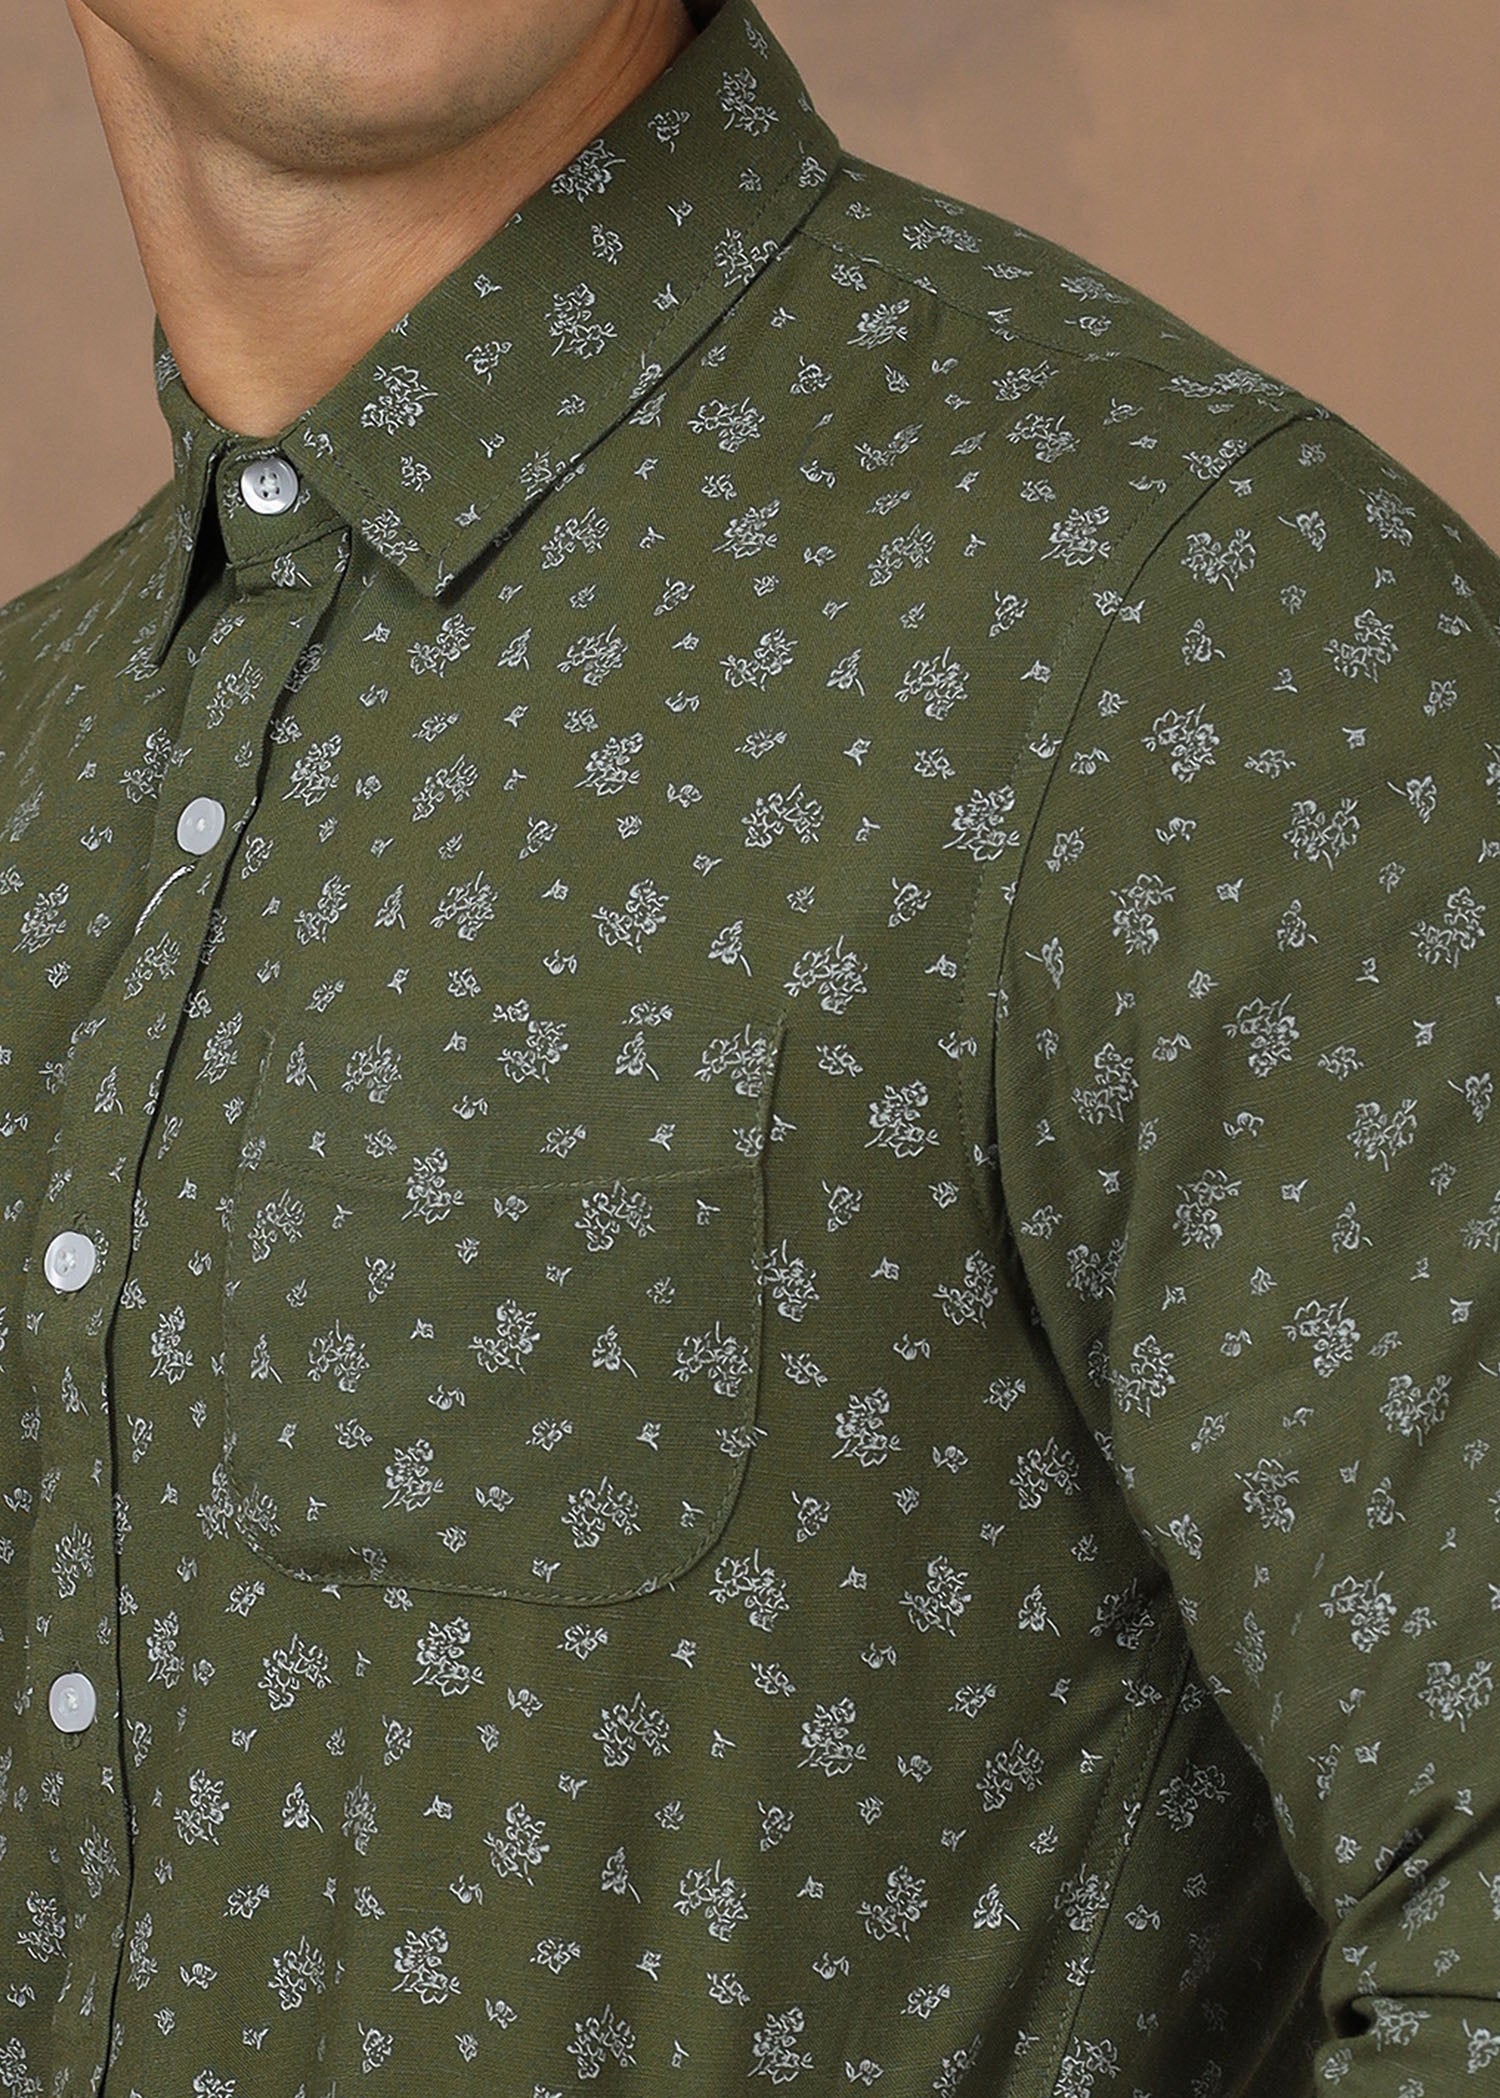 PRINTED PARTY WEAR L/S SHIRT